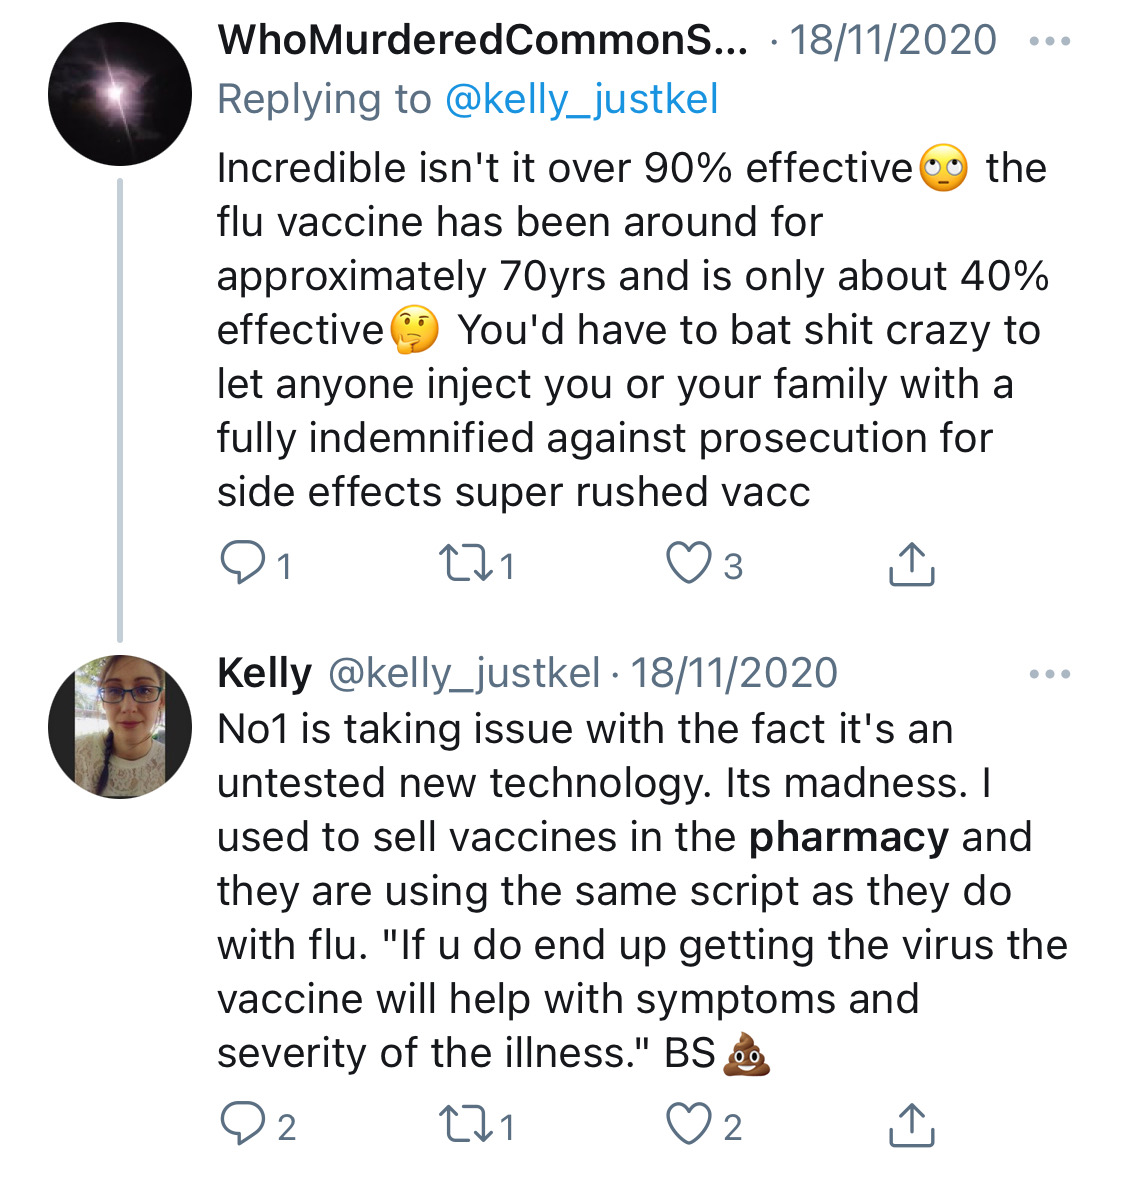 These are the people  #AltShiteUnmasked Kelly O'Driscoll wishes to appeal to and gain the approval of as a far-right agitator for the National Party. But the Macroom native, has recently jumped firmly on the  #antivax bandwagon.